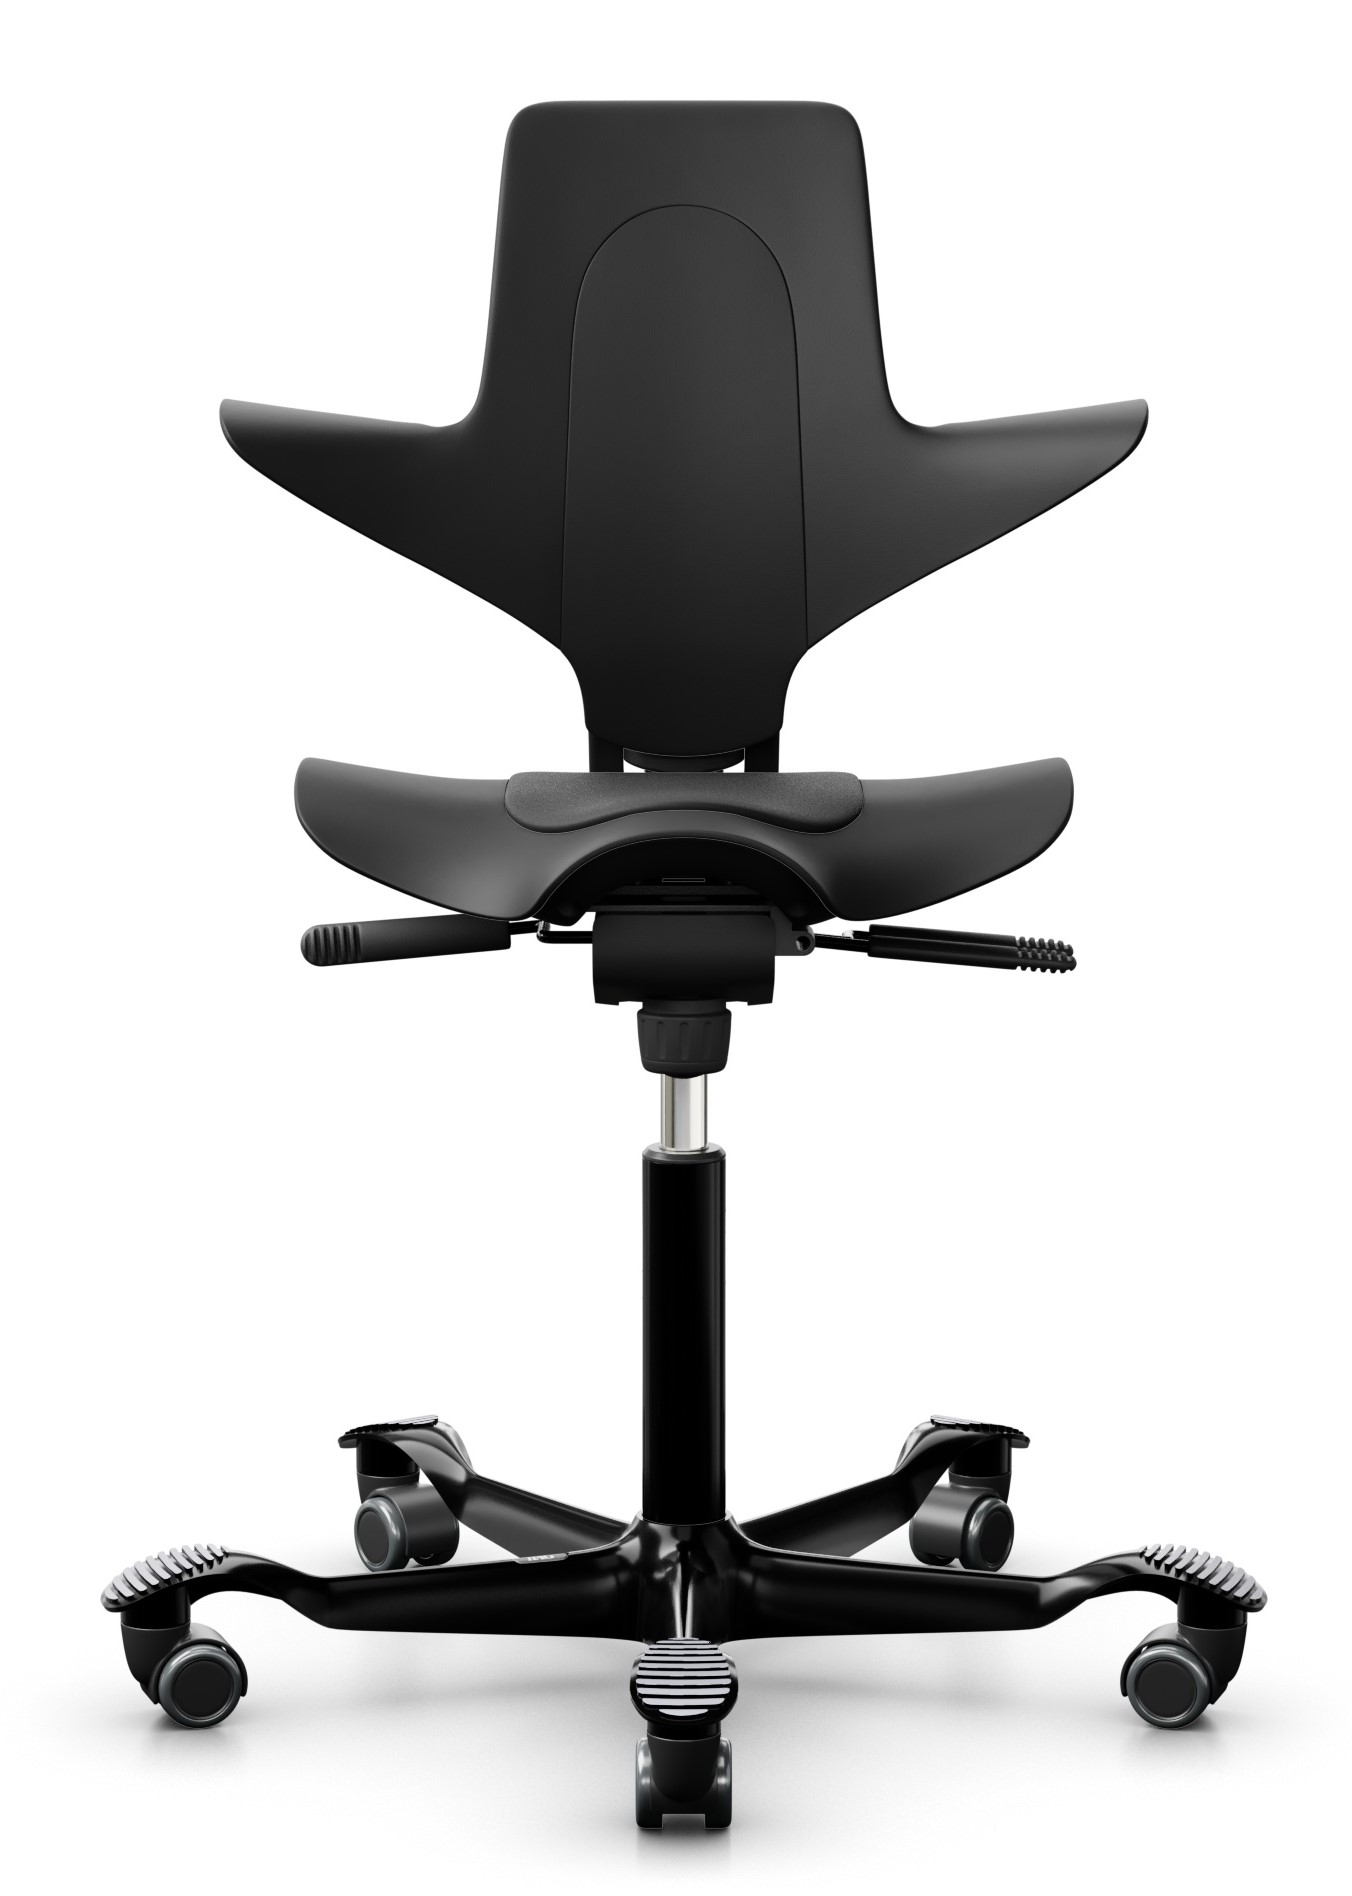 Ergo Chair and Stool for Sonographers